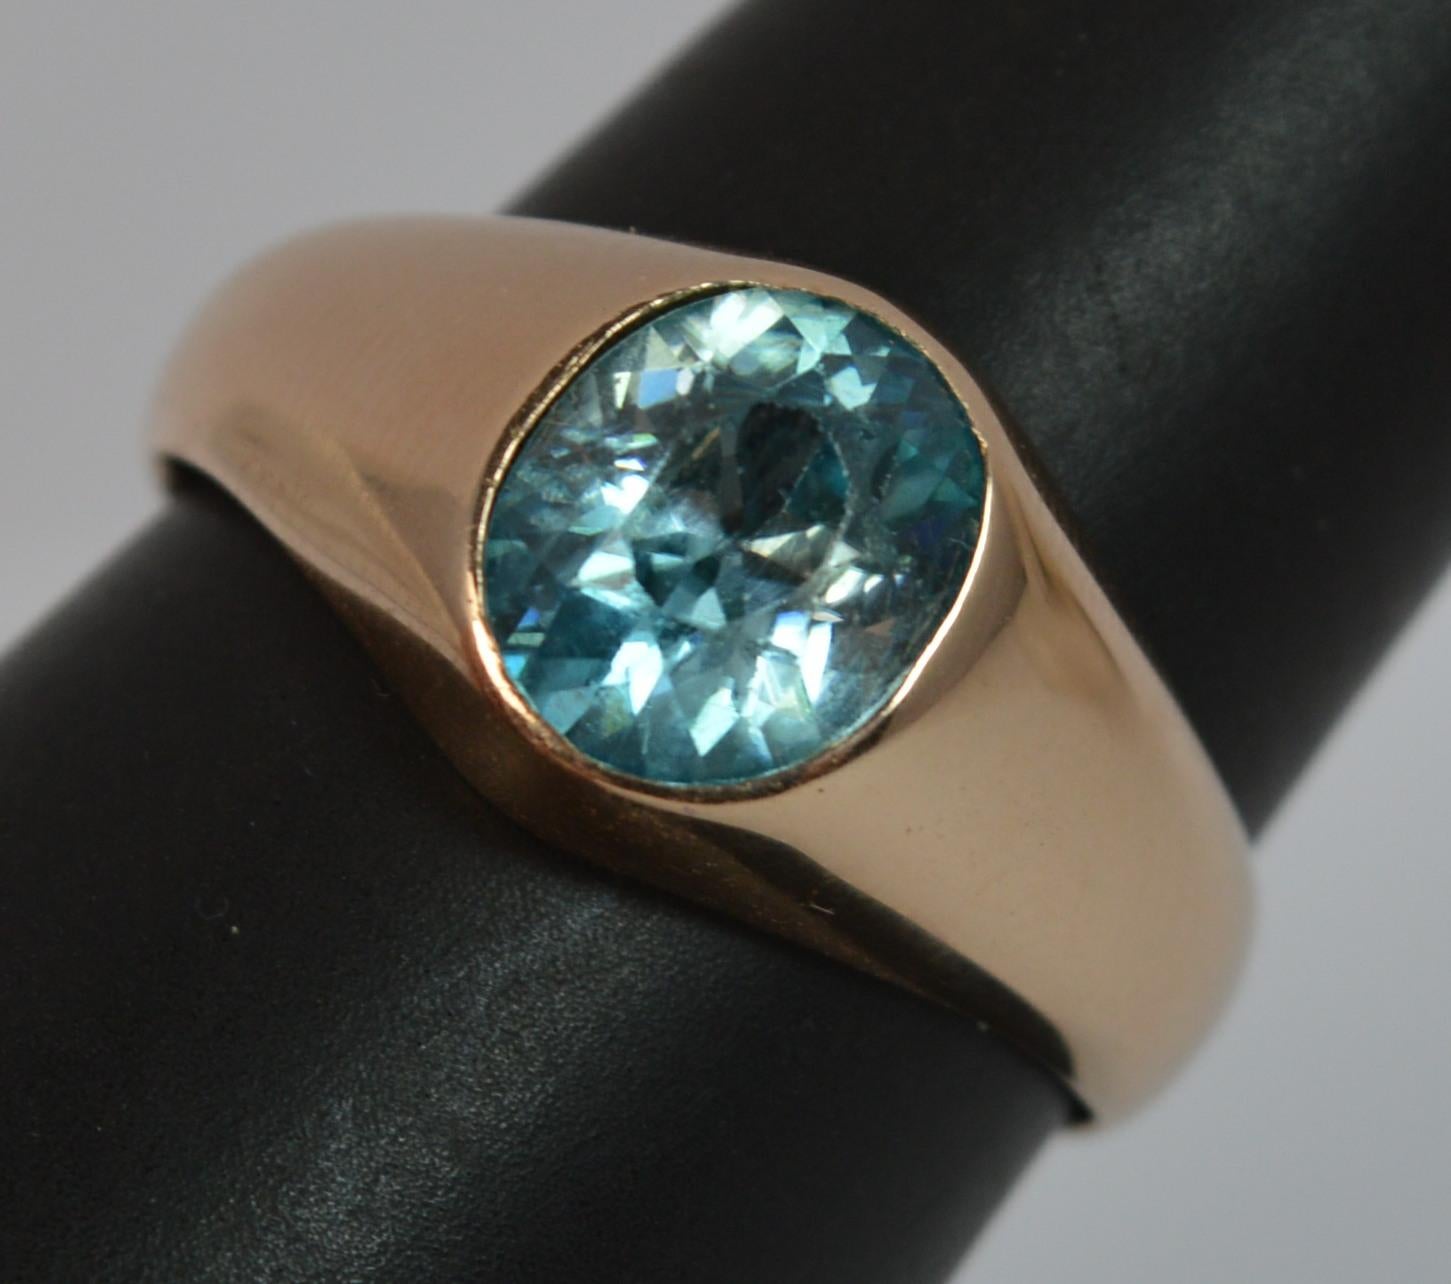 Late Victorian Large Blue Zircon 9 Carat Rose Gold Gypsy Ring 9